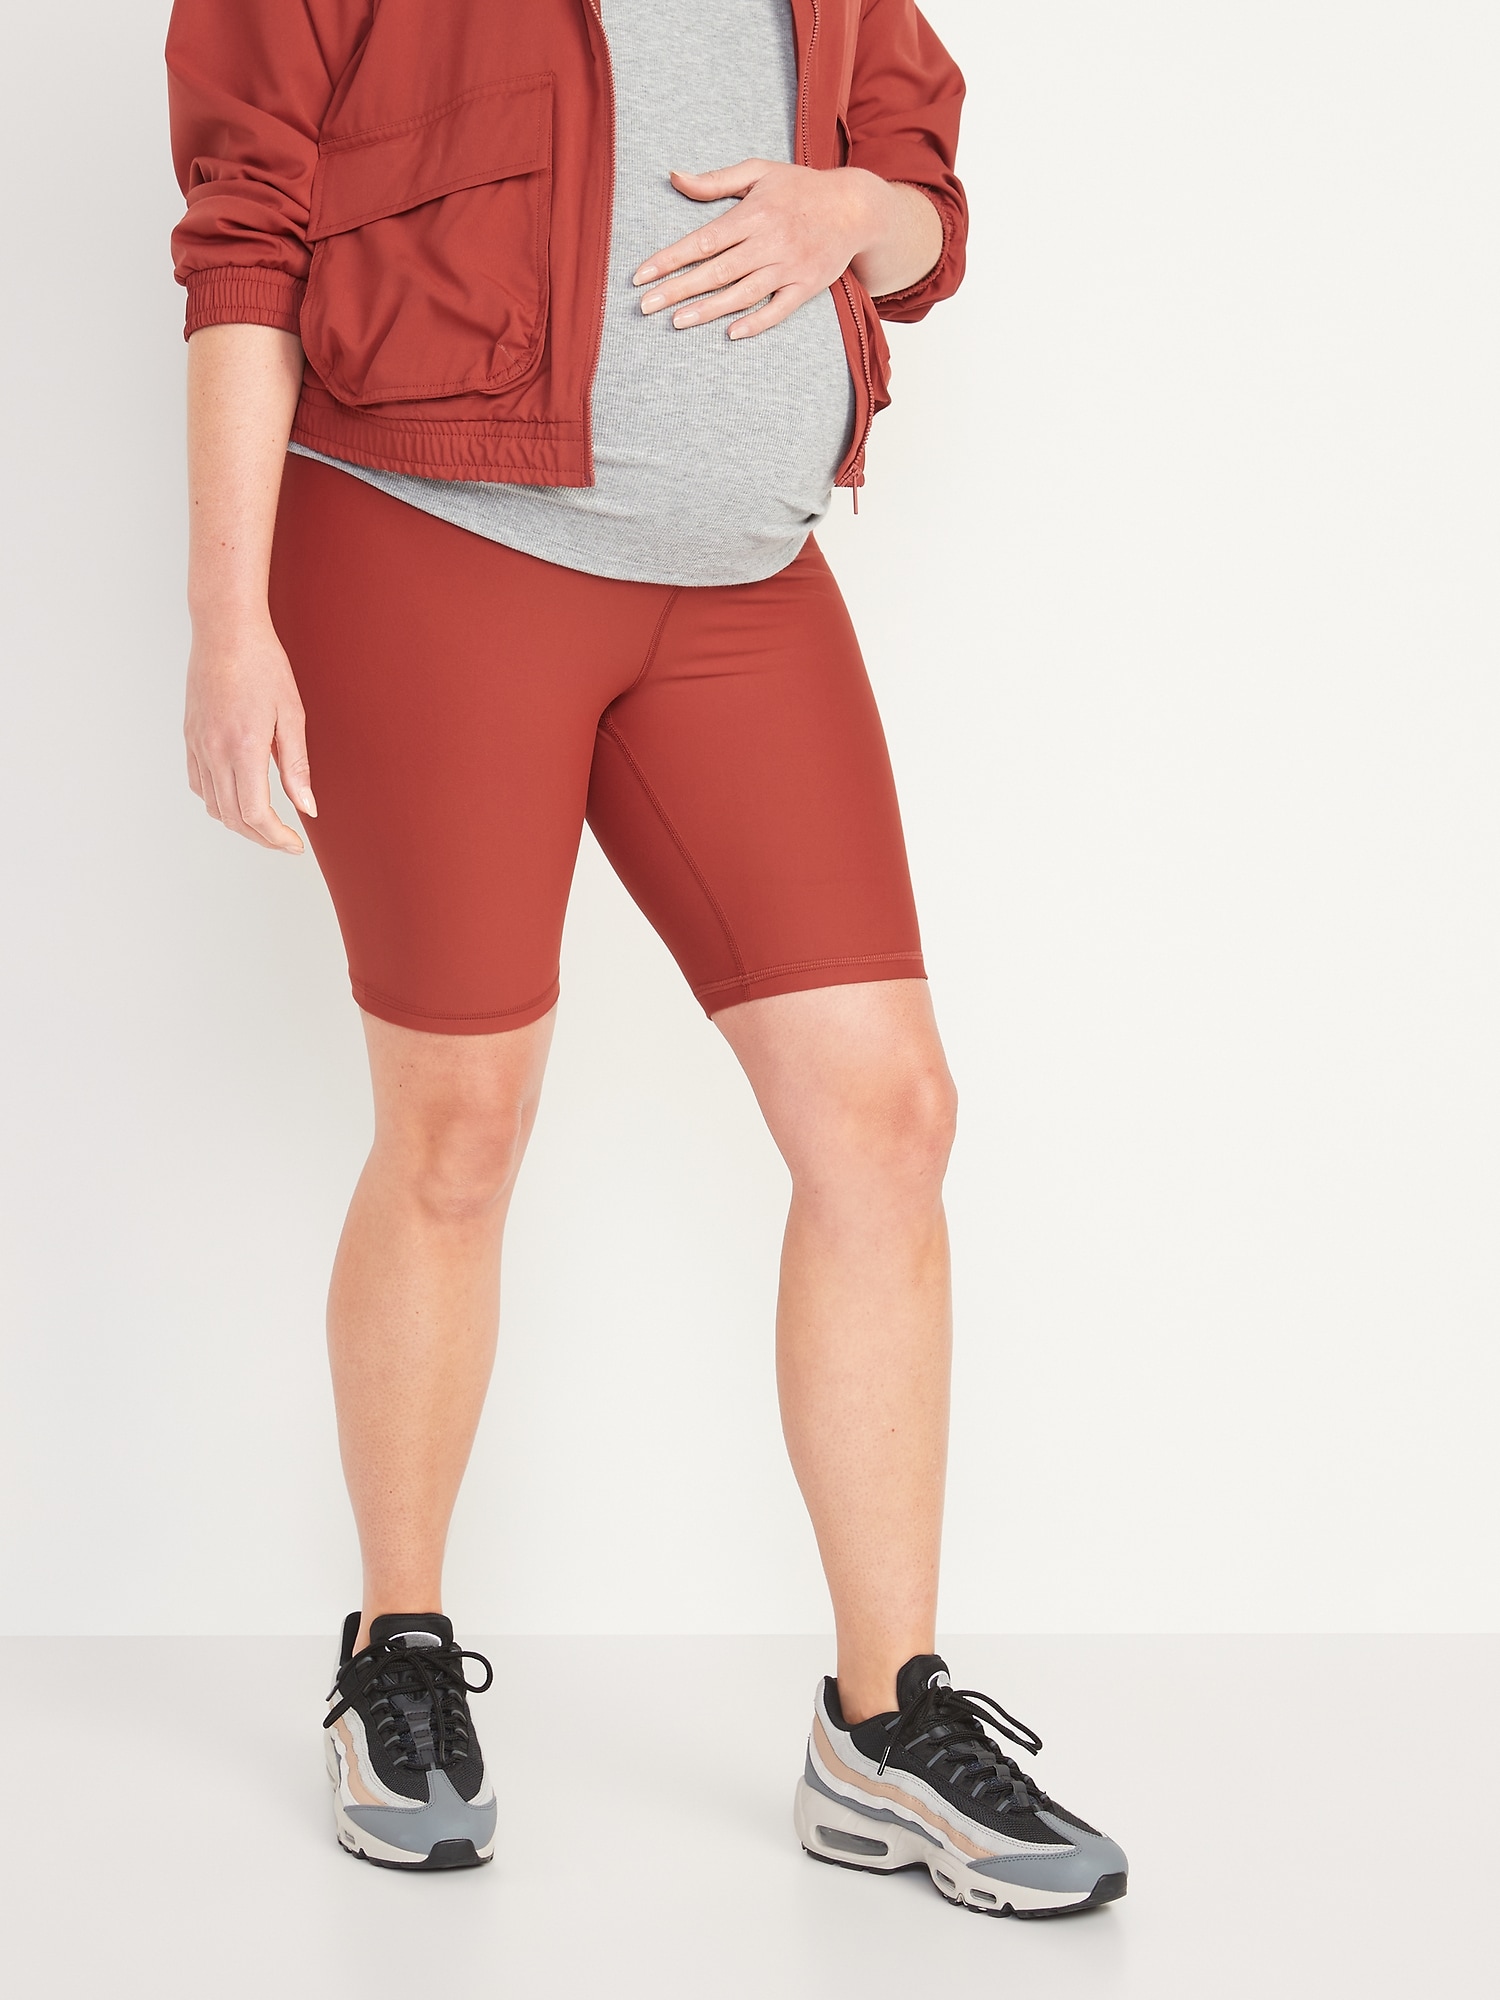 Old Navy Powersoft 8 Inch Short, Maternity Bottoms